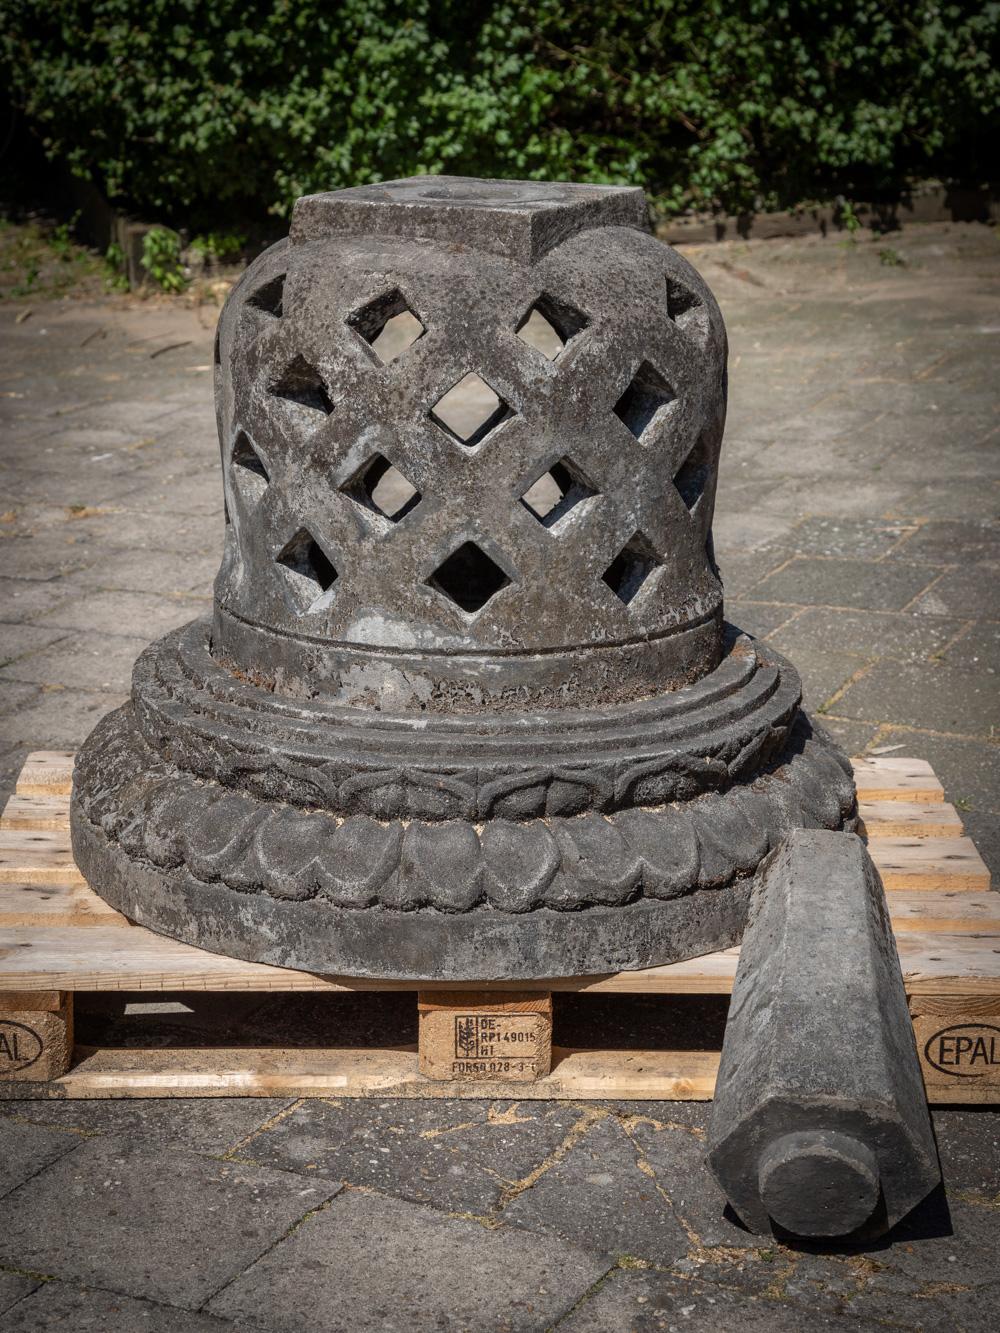 The old lavastone Stupa is a remarkable architectural masterpiece crafted from lavastone, known for its durability and timeless beauty. Standing at an impressive height of 124 cm and boasting a diameter of 100 cm, this Stupa commands attention and